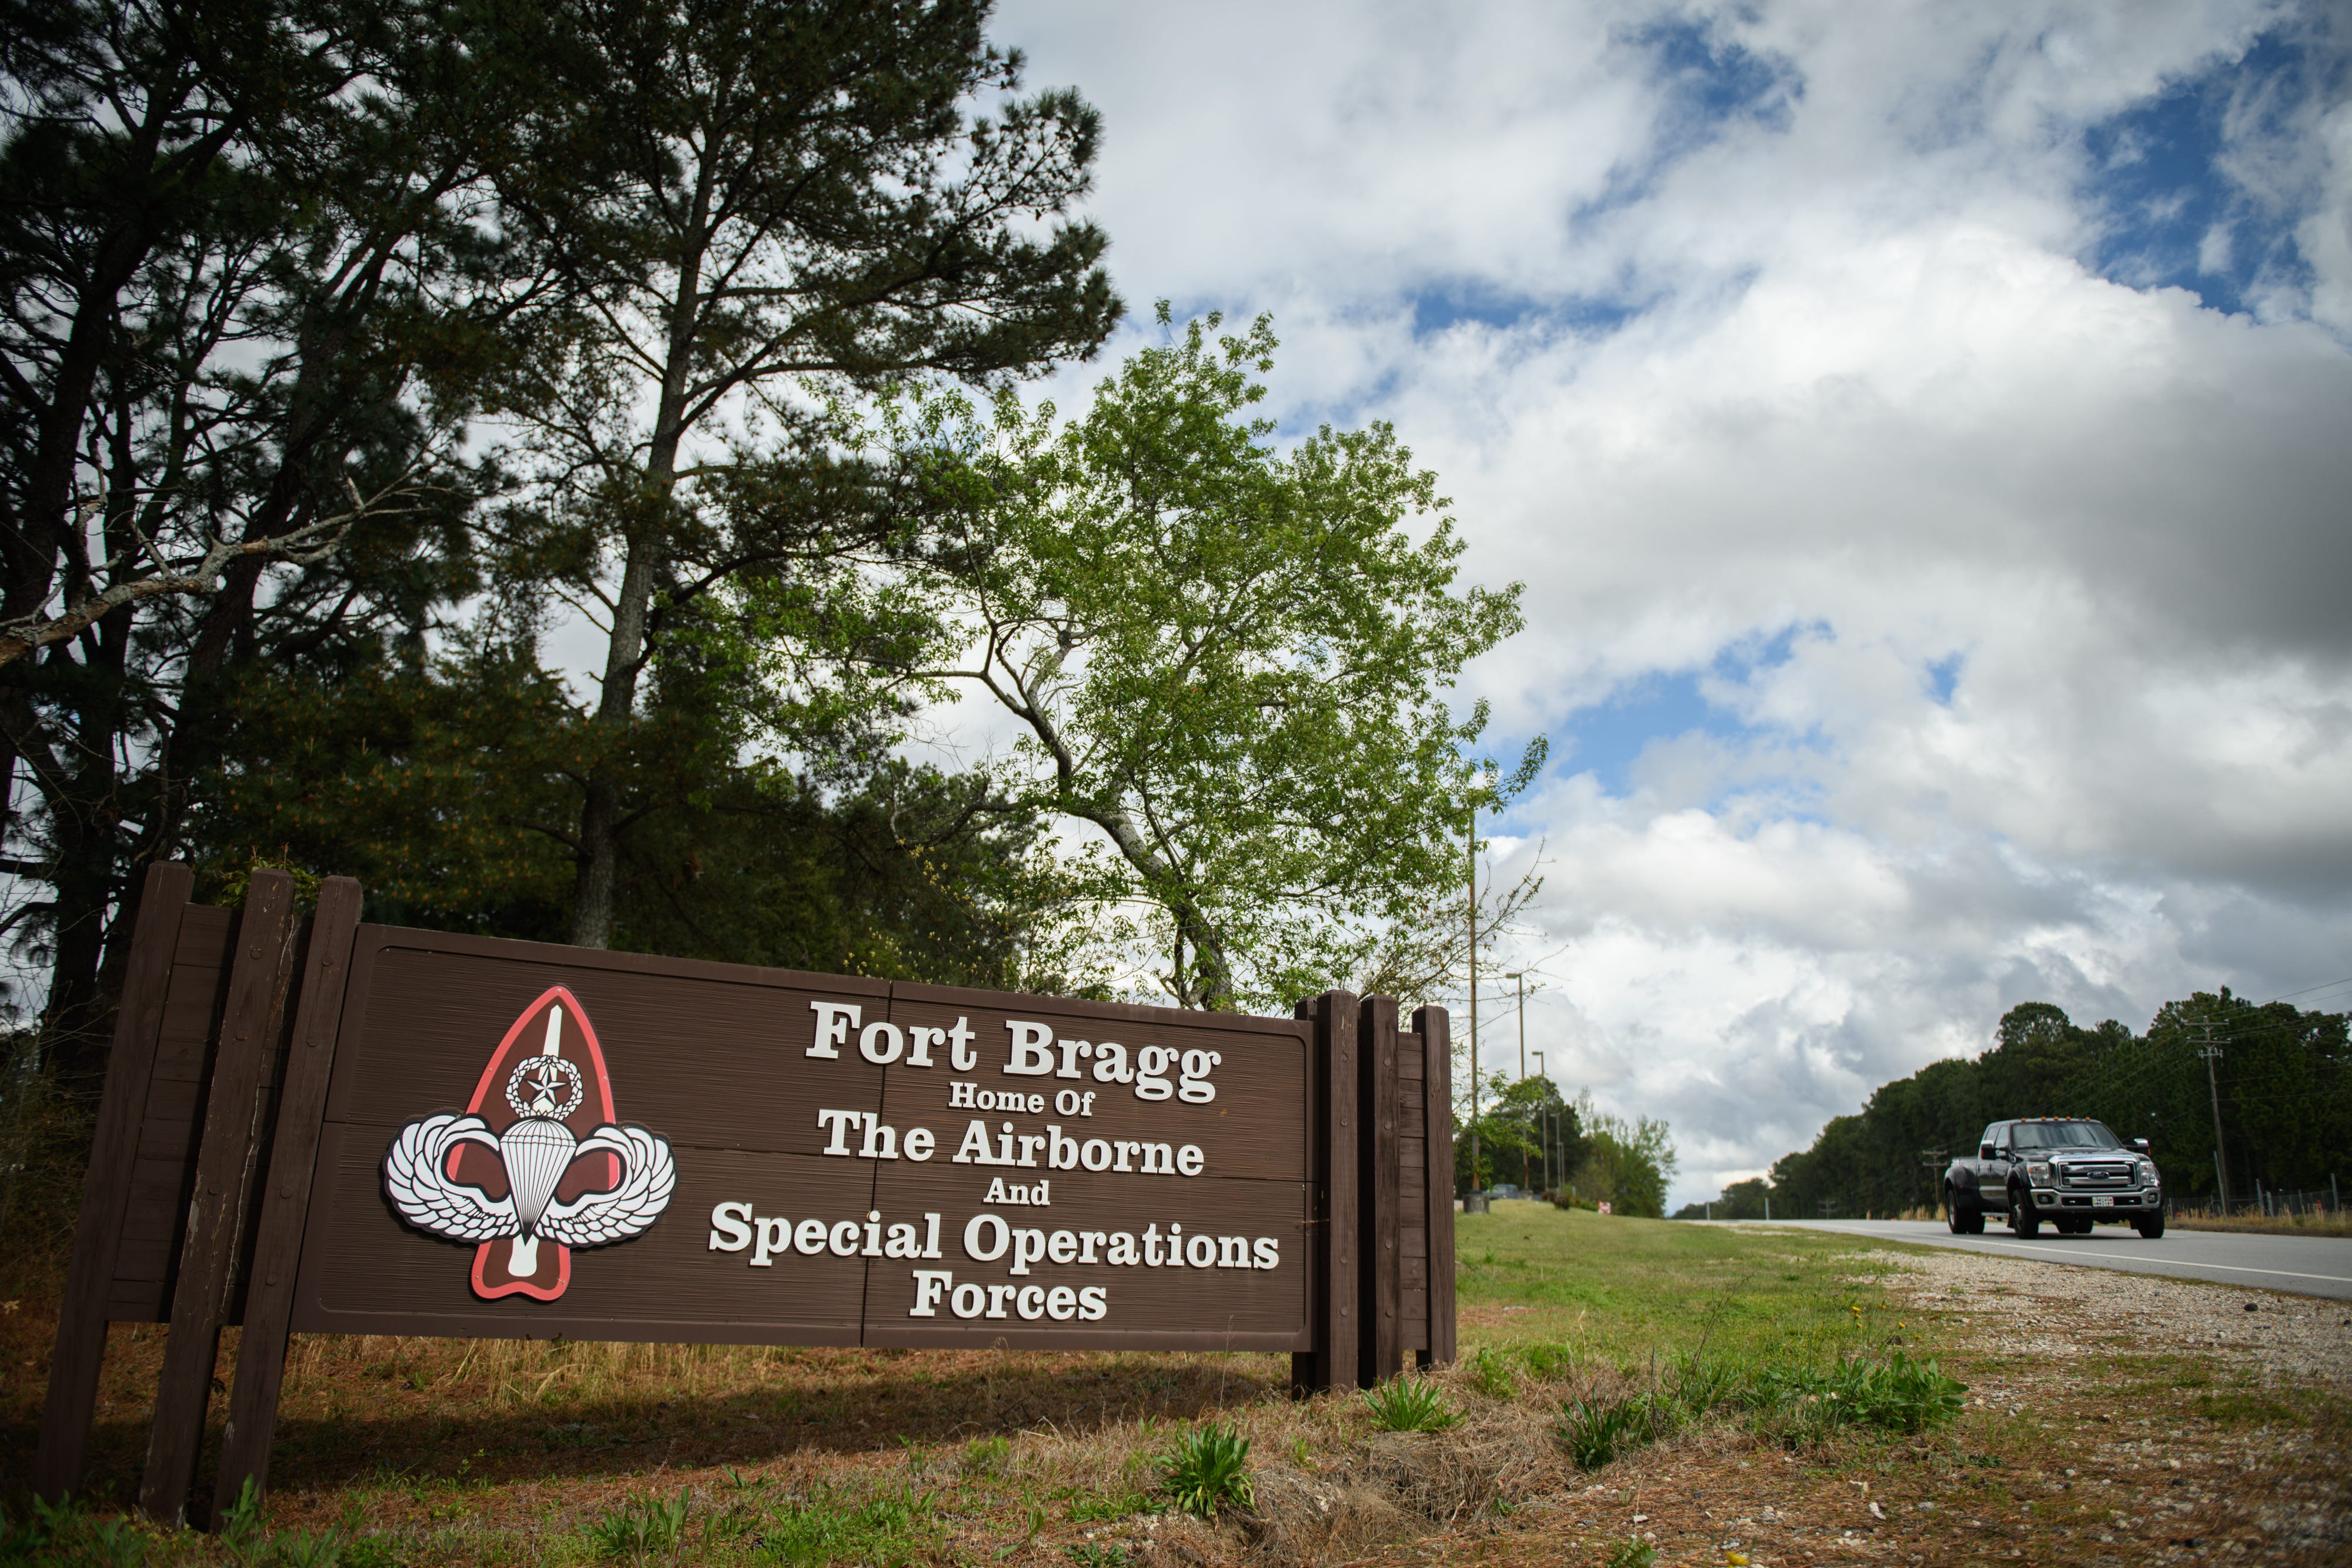 15 U.S. Army Special Operations Command soldiers questioned during Fort Bragg drug probe